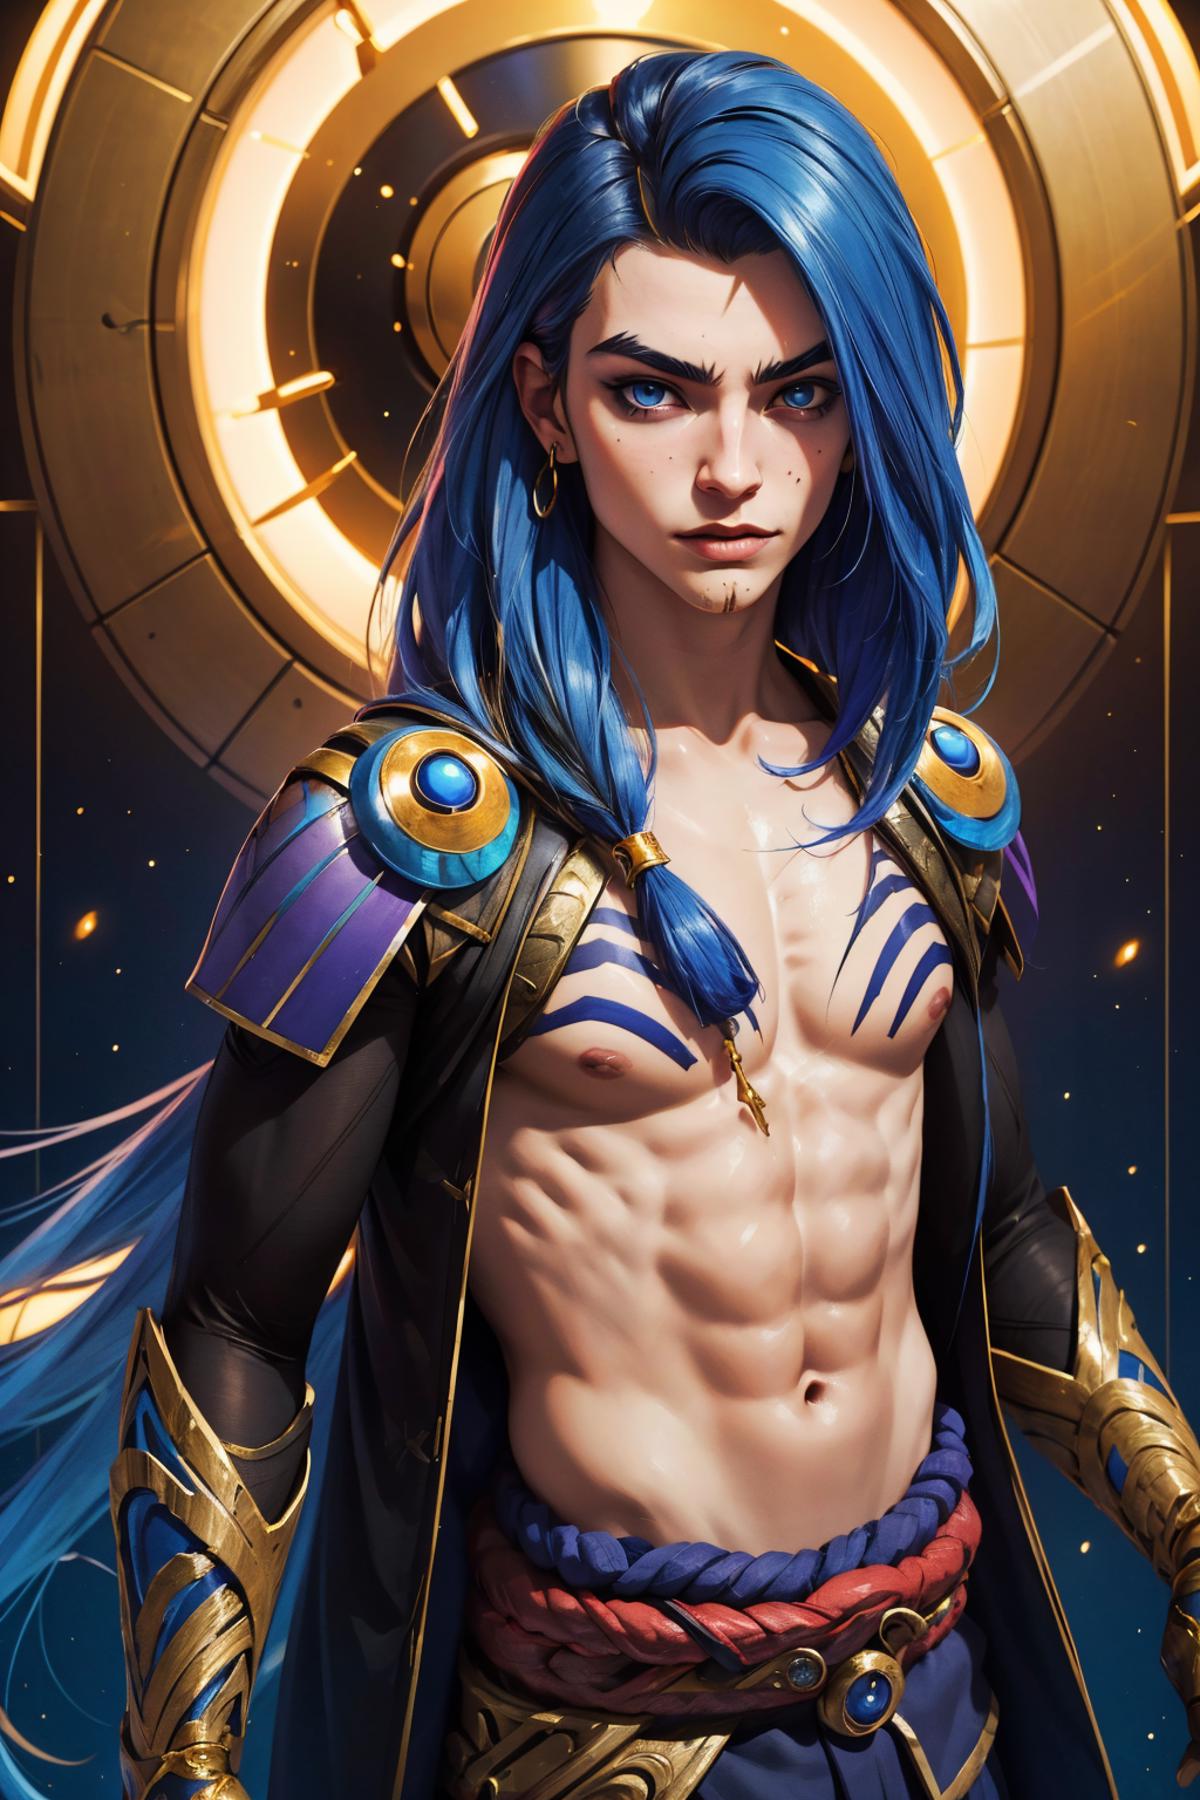 Odyssey Kayn All Forms | League of Legends image by AhriMain